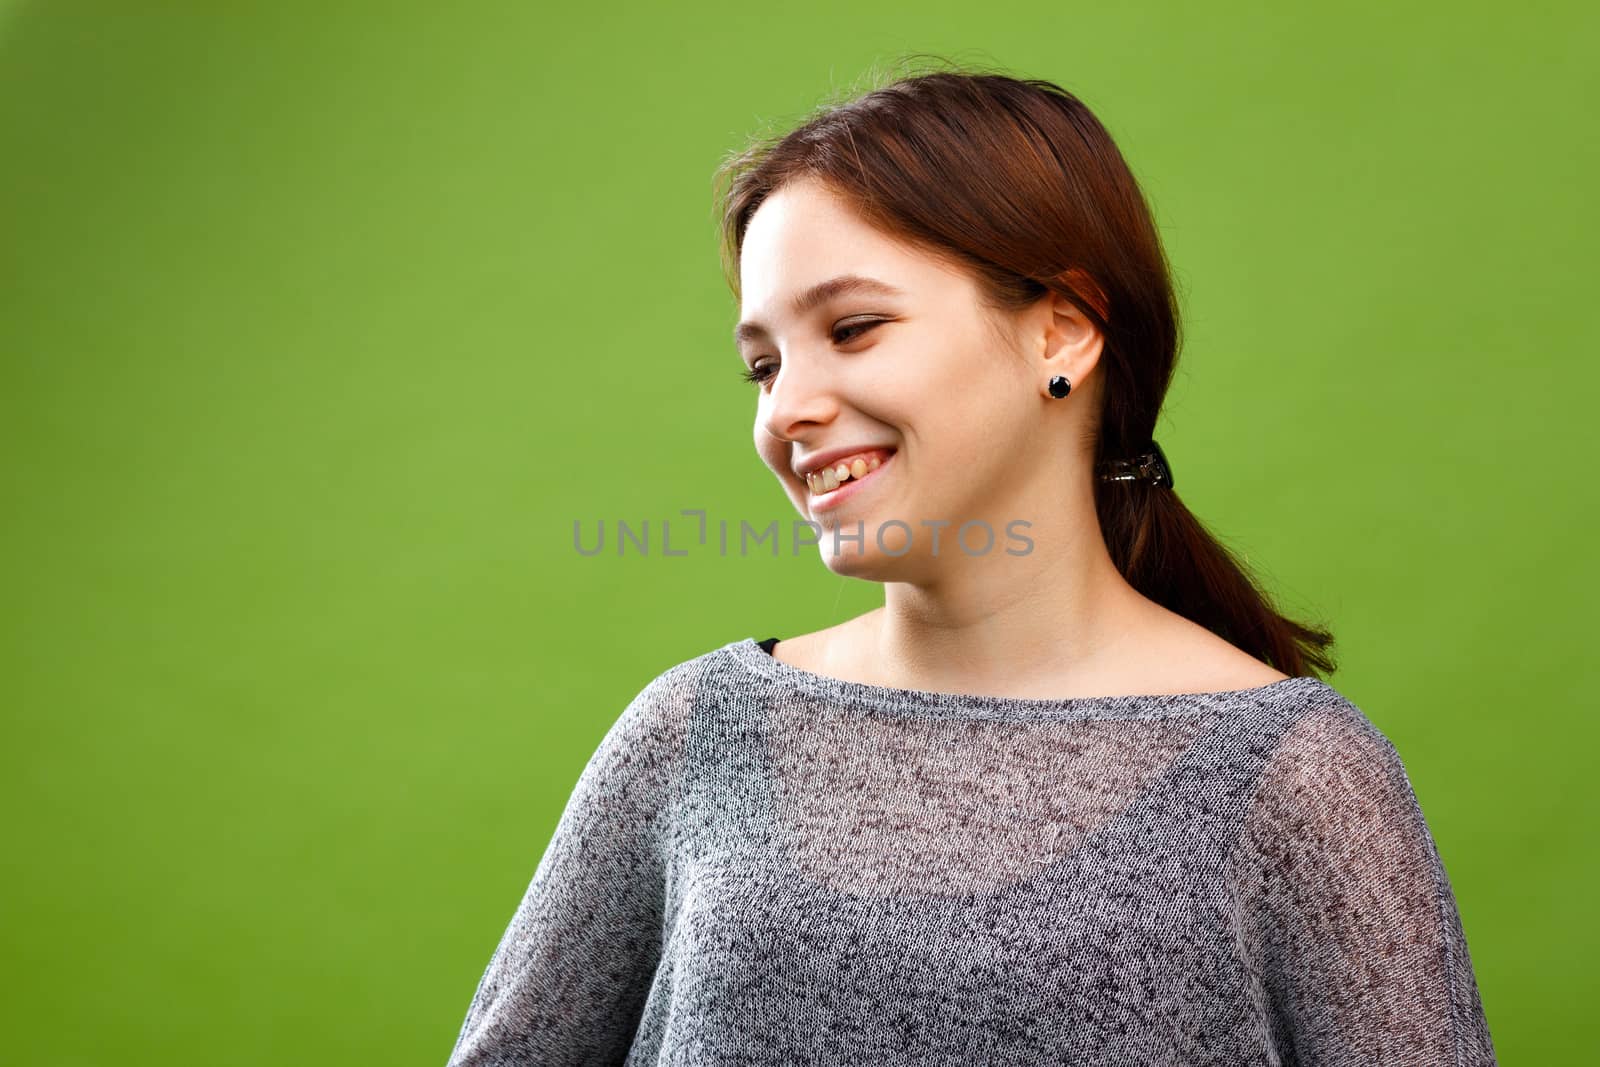 Portrait of young laughing girl looking left on green